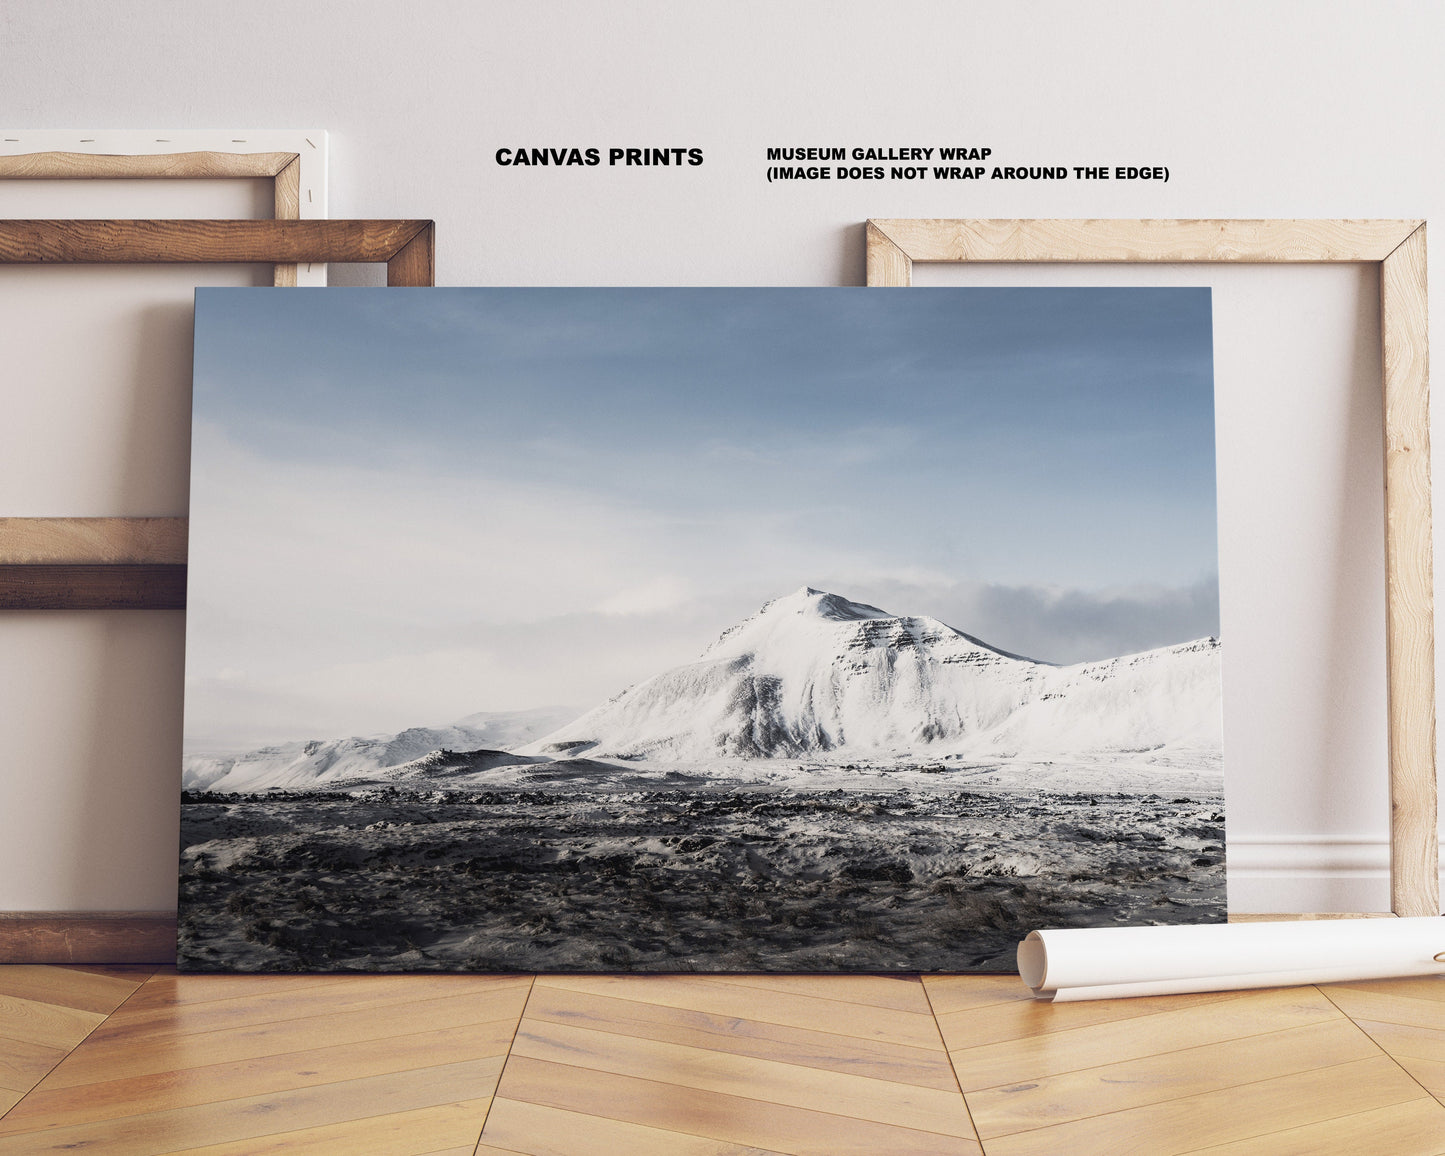 Icelandic Mountain Landscape - Iceland Photography Print - Iceland Wall Art - Iceland Poster - Landscape - Snaefellsnes - Mountain - Winter